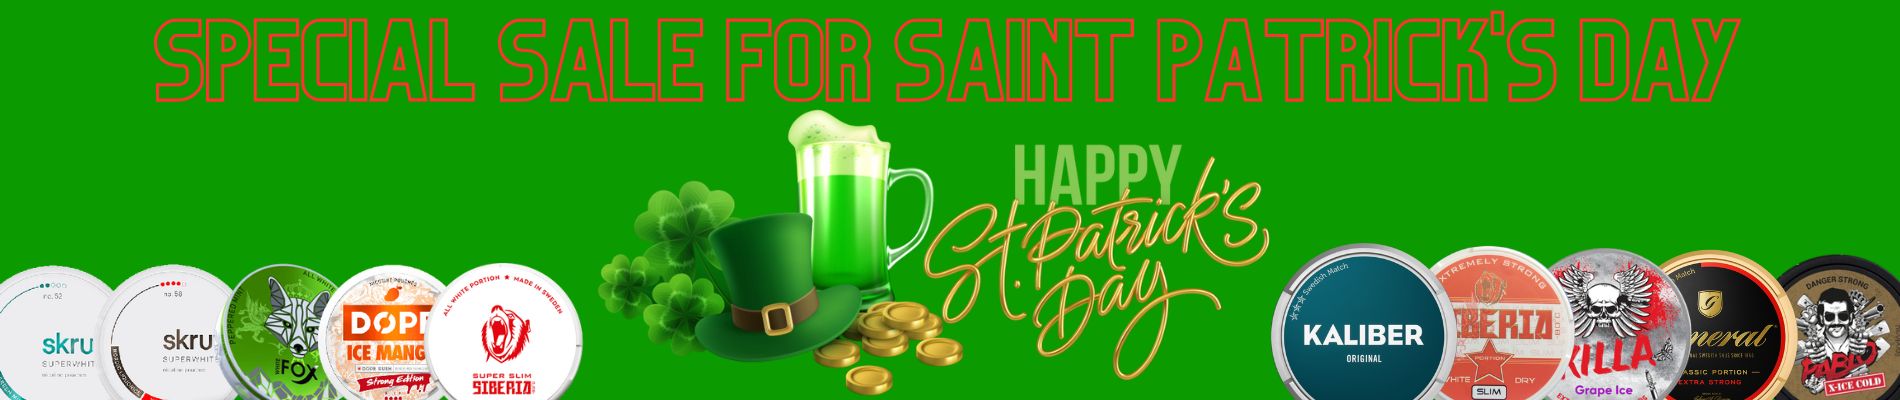 Saint Patrick's Day, Nicotine Pouches and Snus